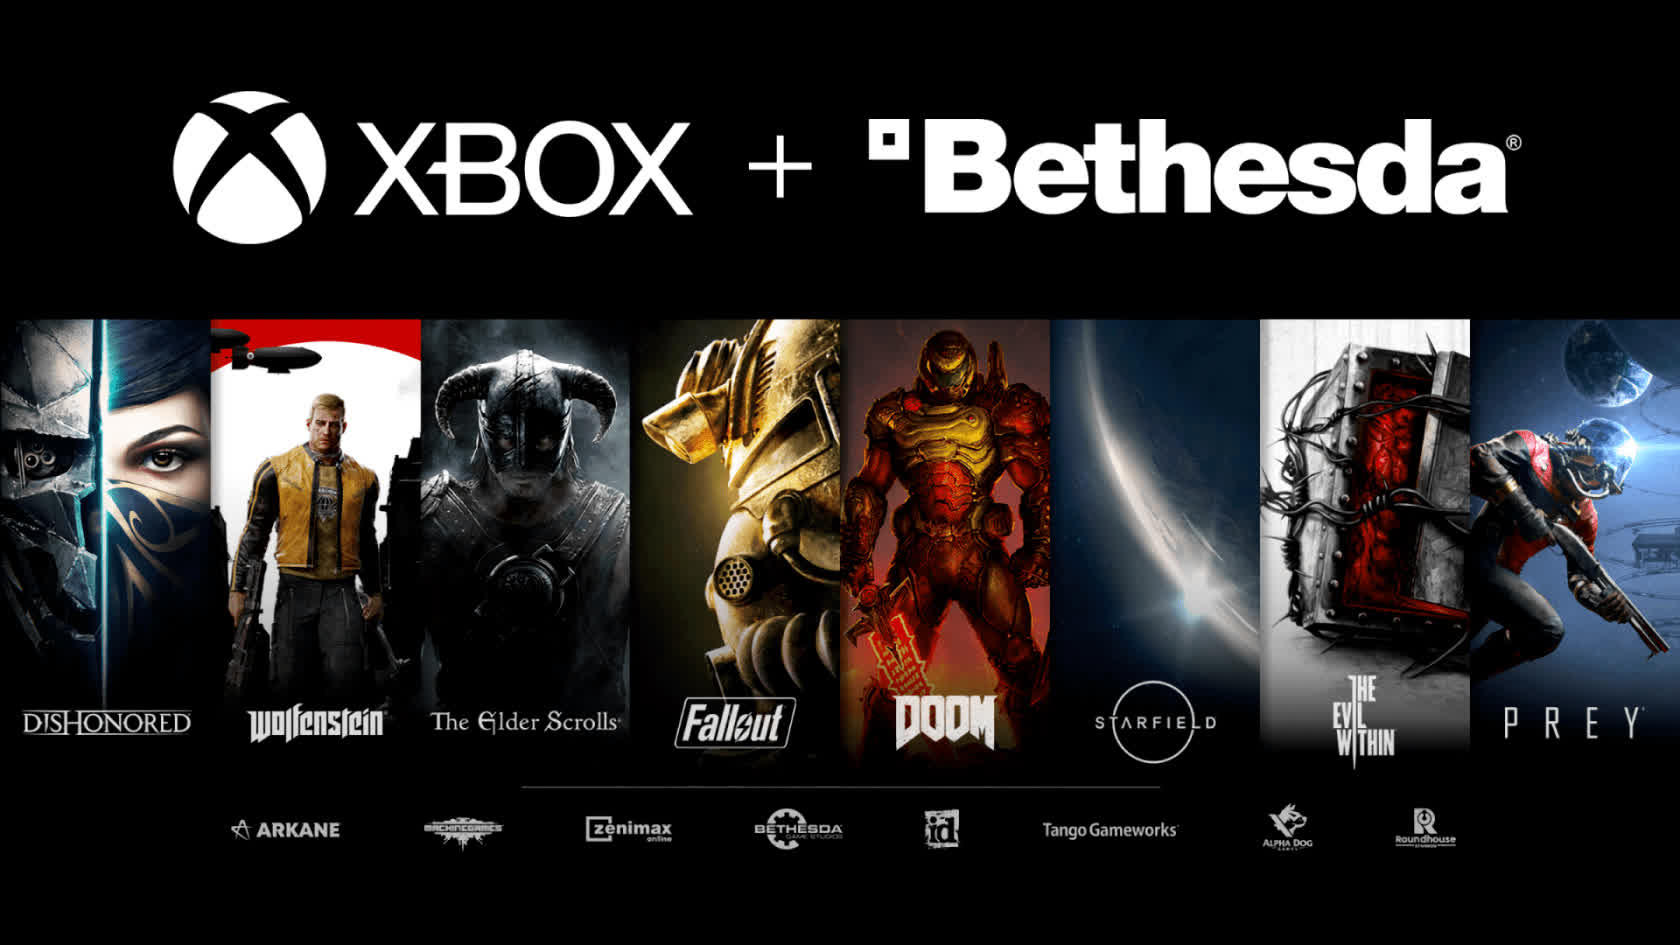 Microsoft to buy ZeniMax for $7.5 billion, will gain control of The Elder Scrolls, Doom, Fallout, and more